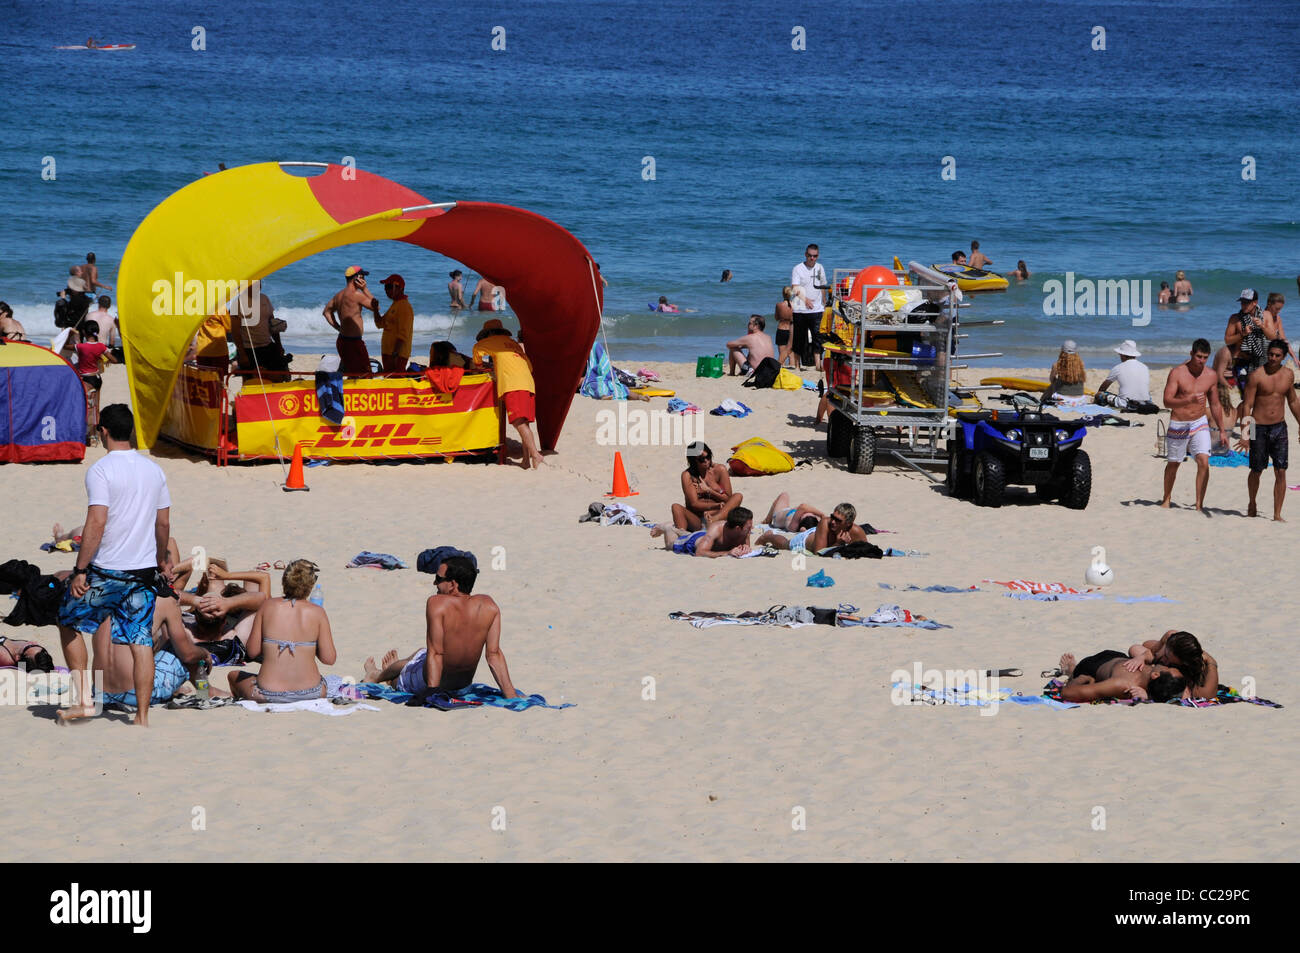 A red and yellow Life guard's first-aid centre (medical centre) at Bondi Beach near Sydney, New South Wales, Australia Stock Photo